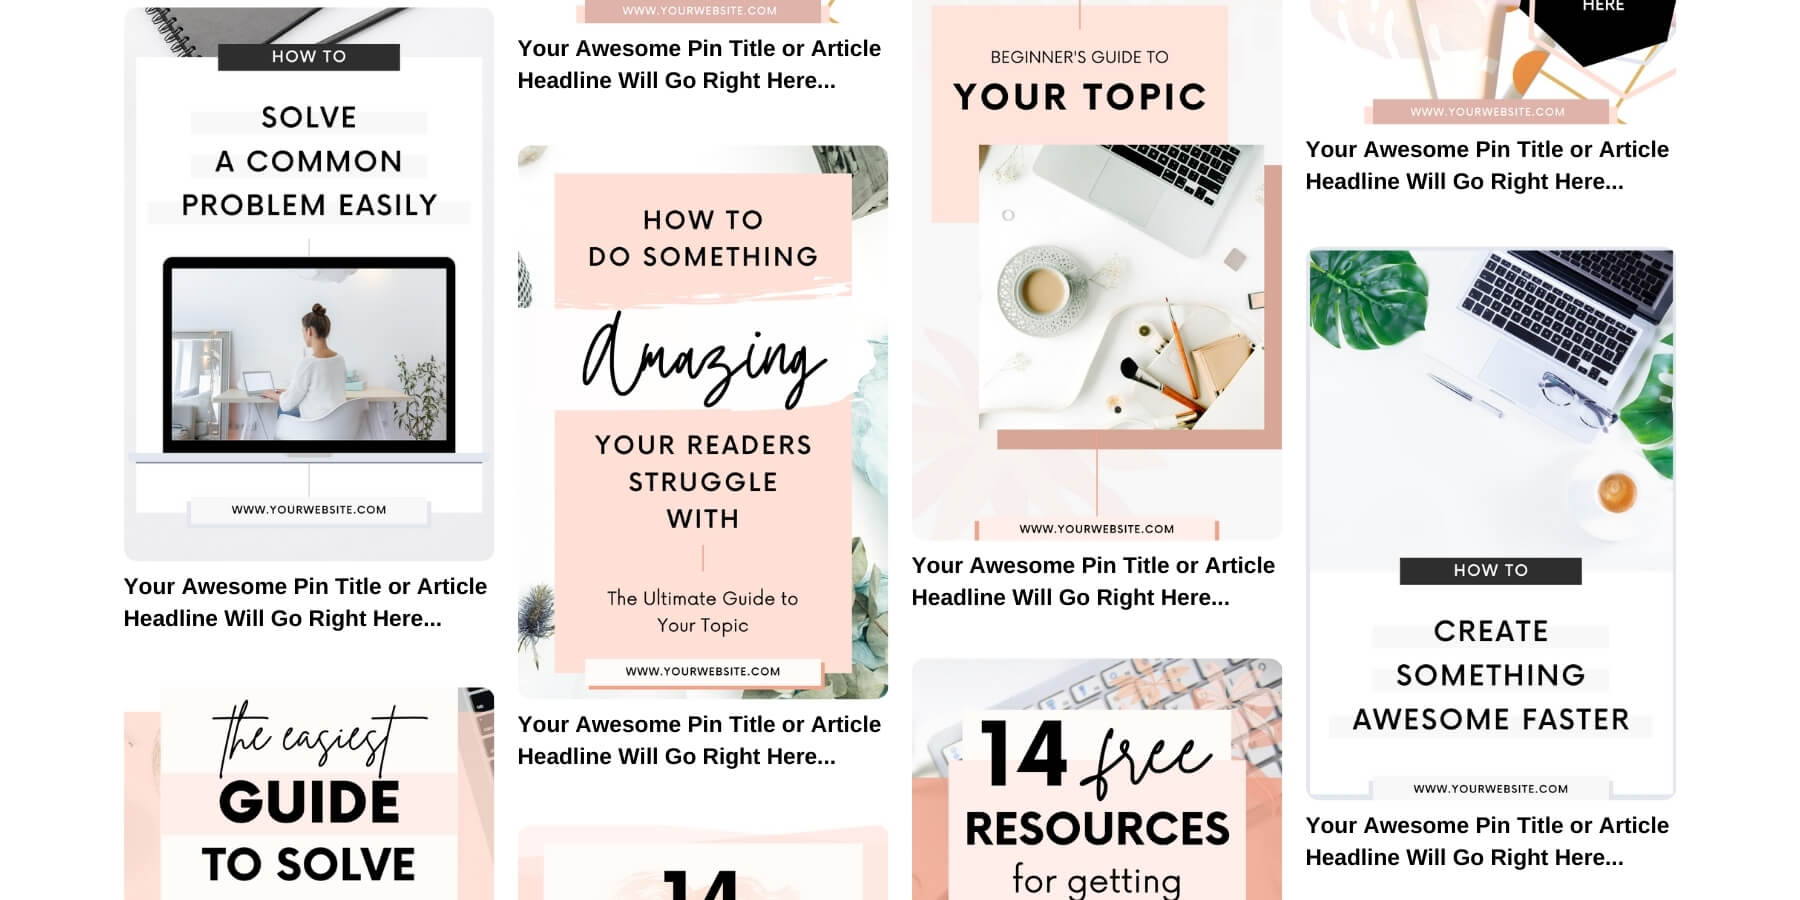 Viral Canva Pinterest templates for bloggers to grow blog traffic - Pinterest Marketing Strategy Resources